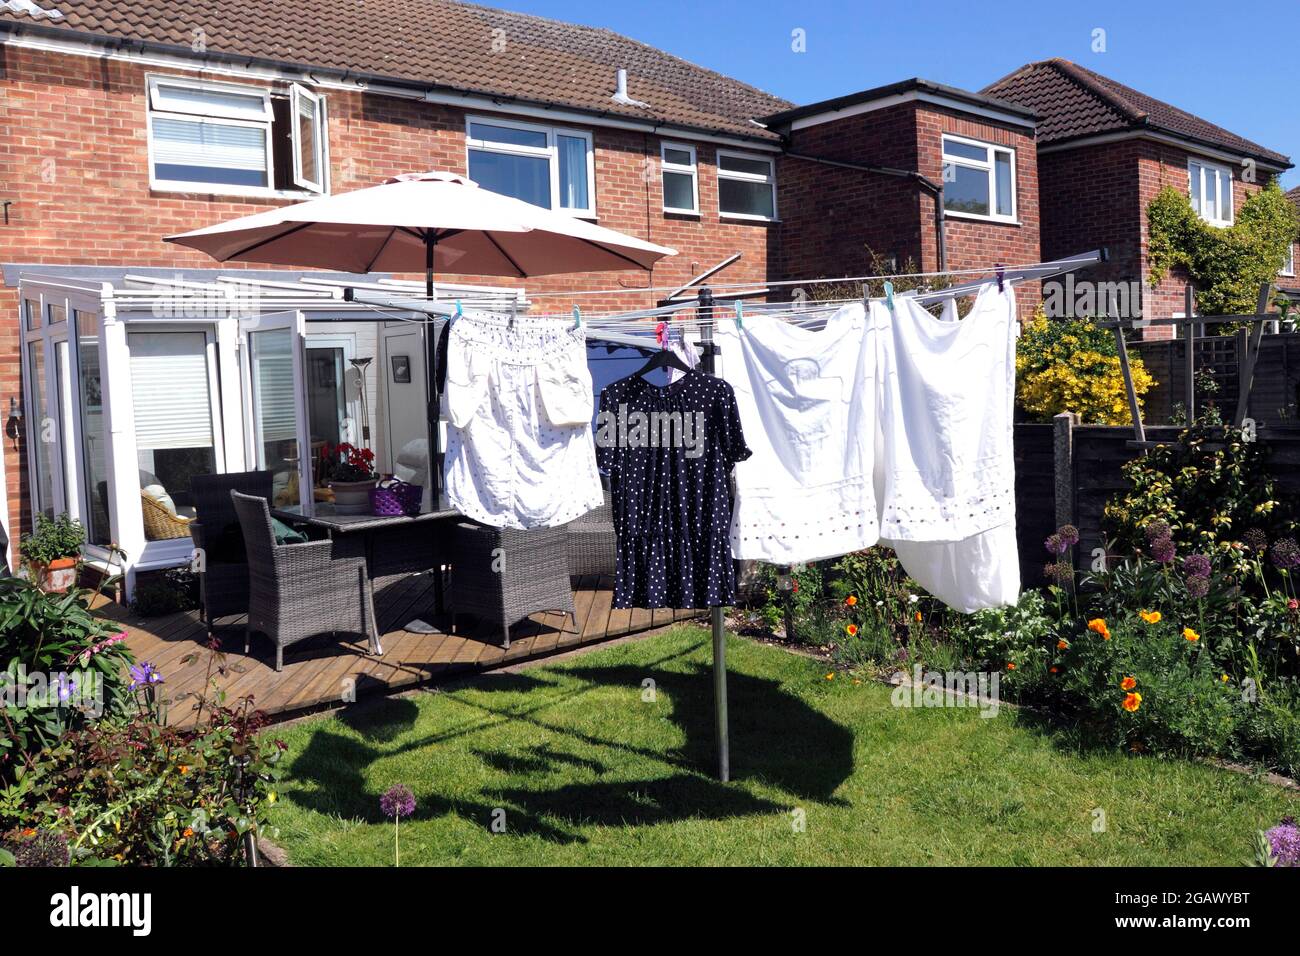 CLEAN LAUNDRY DRYING ON A WASHING LINE Stock Photo